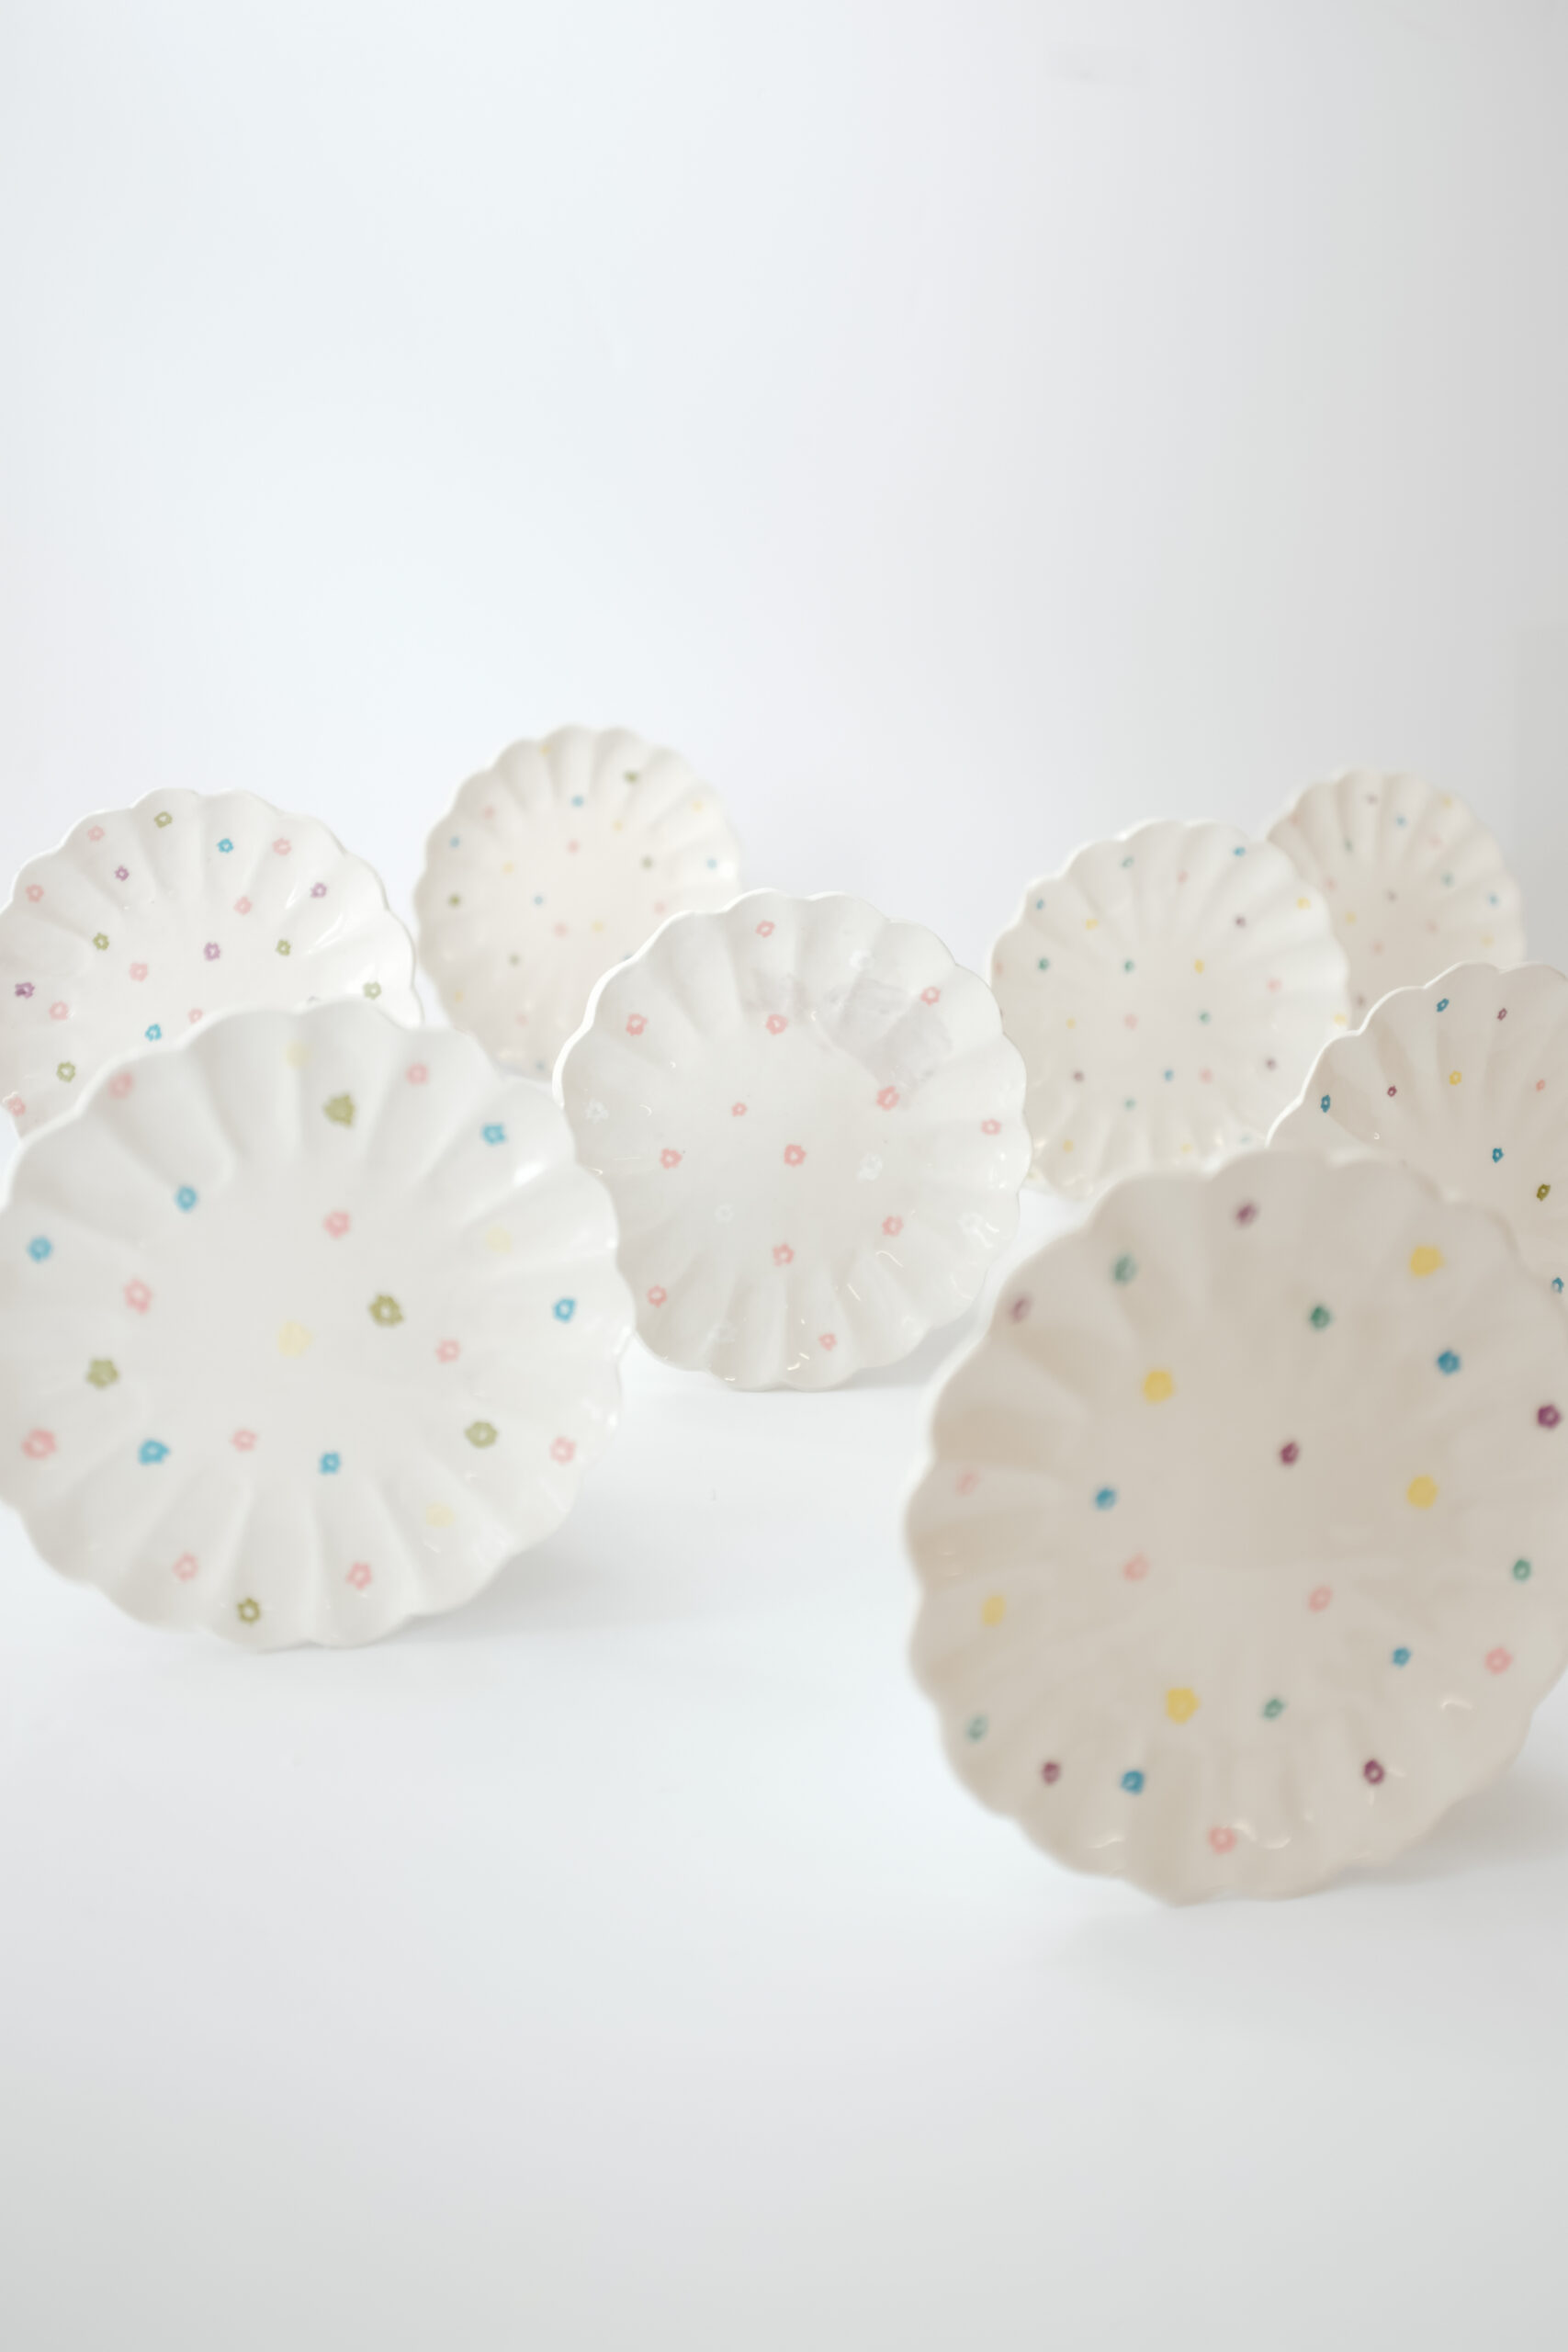 Fave New Arrivals on The Shop: Our Daisy Love Ceramics!